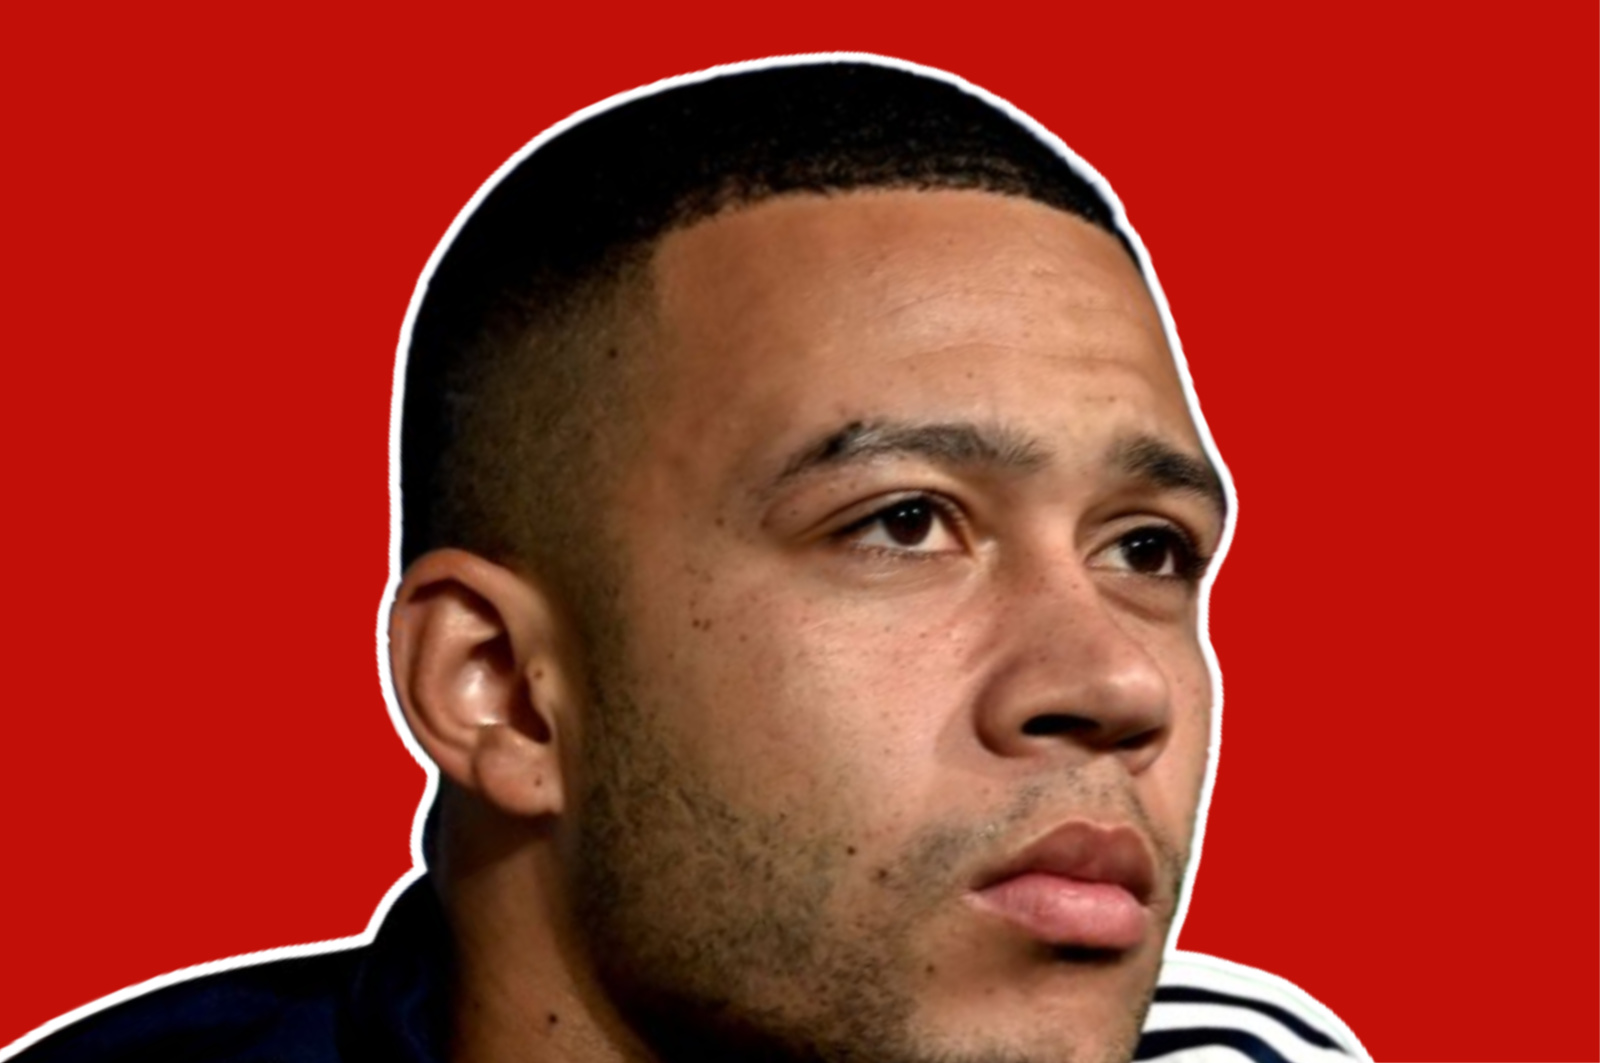 Photo – Memphis Depay spotted rocking remake of the classic Manchester United 83-84 home kit